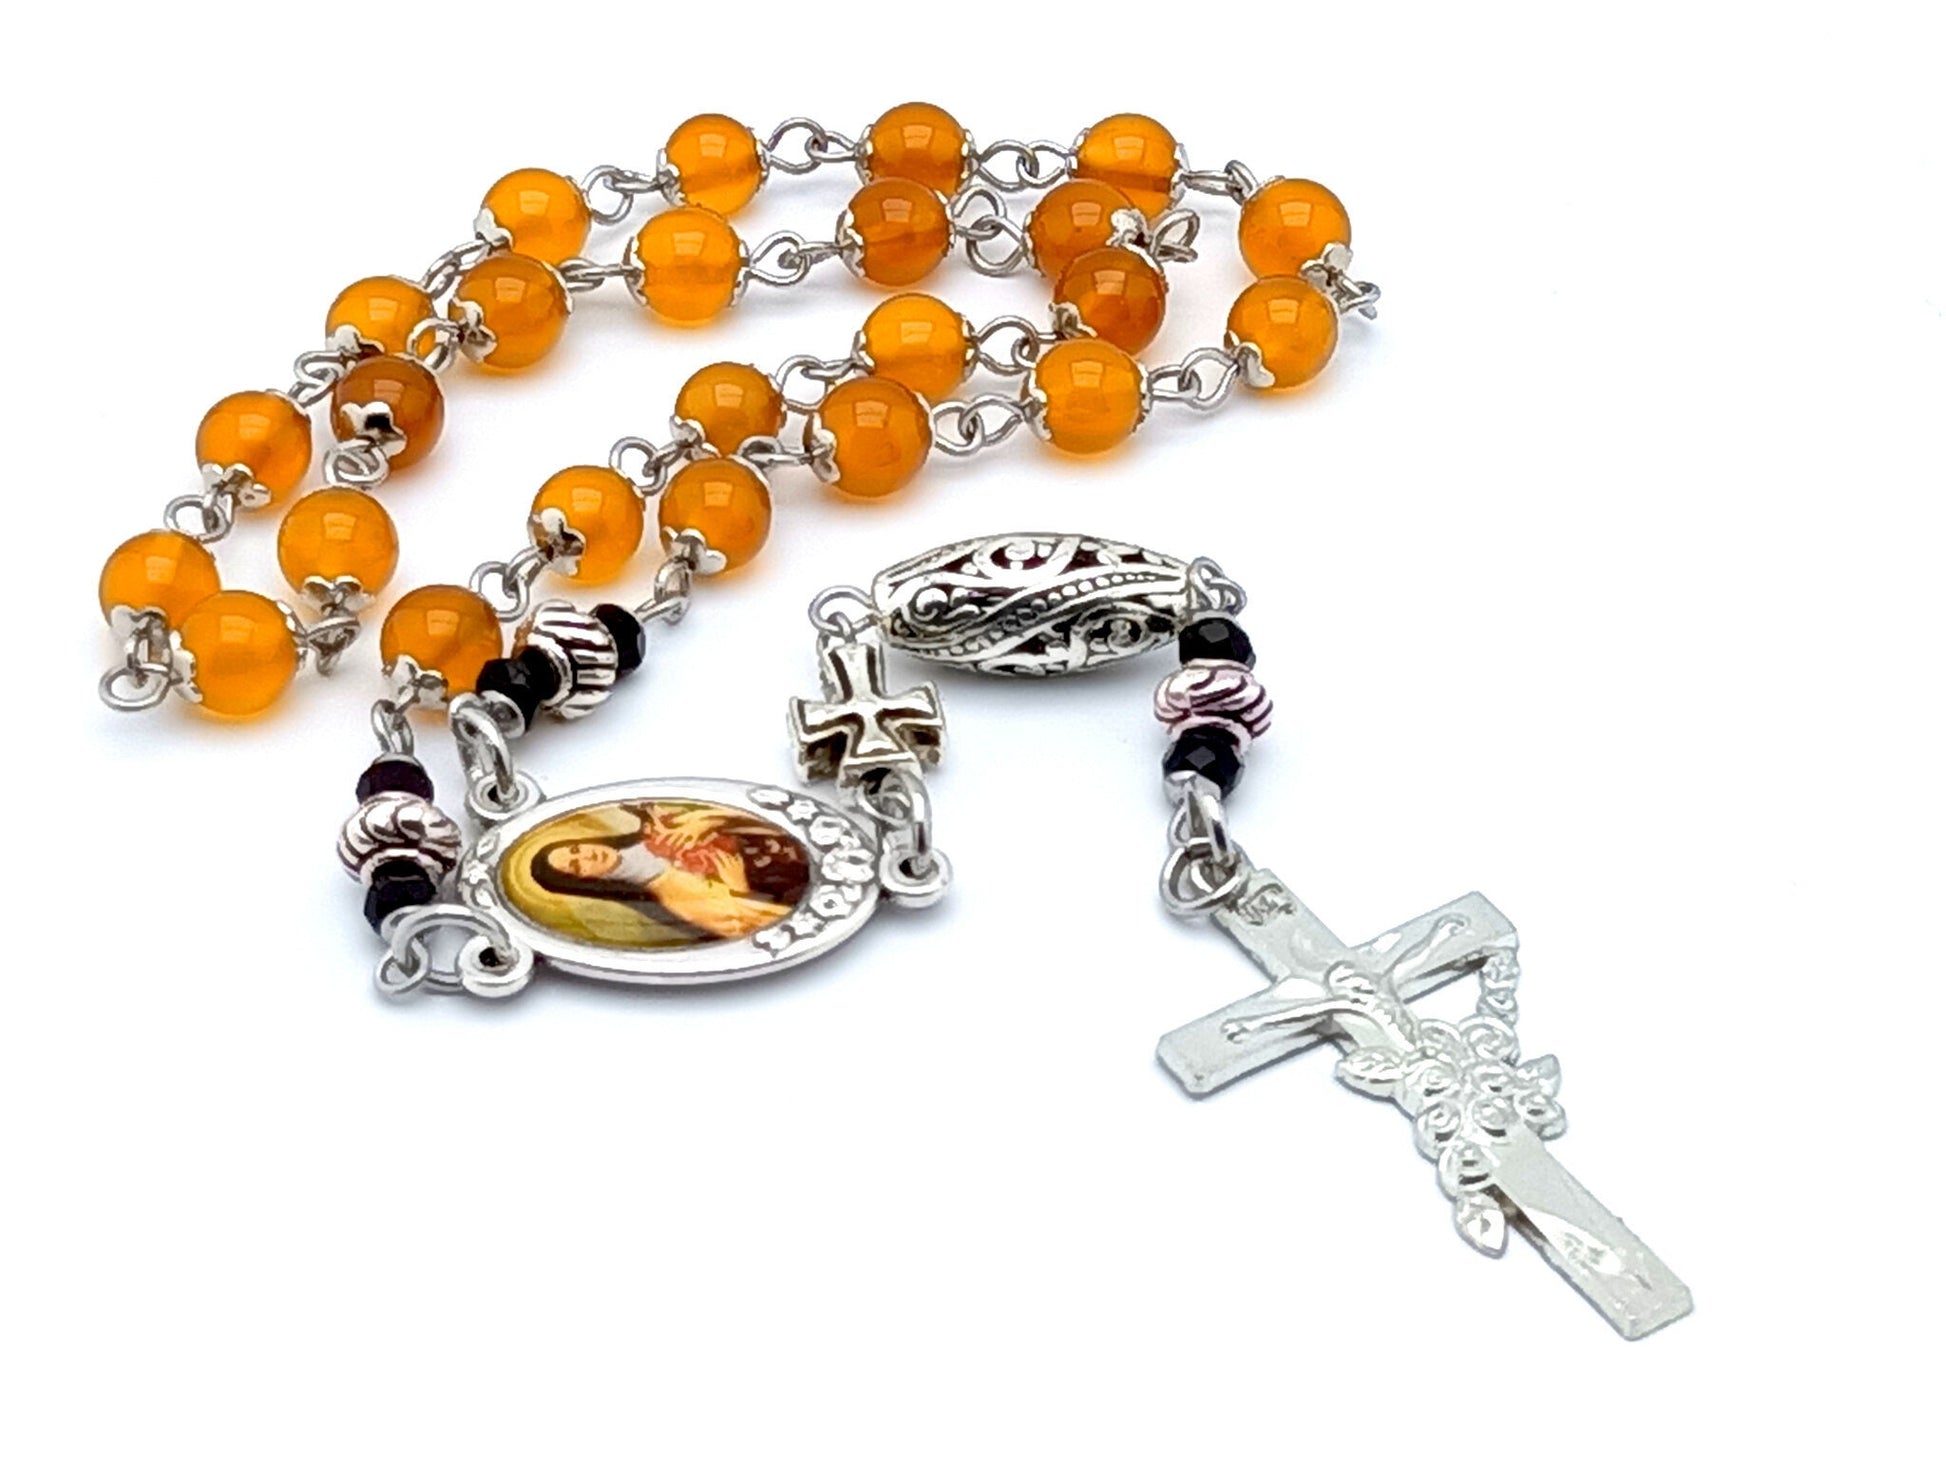 Saint Therese of Lisieux unique rosary beads prayer chaplet with orange agate gemstone beads, floral crucifix and picture centre medal.